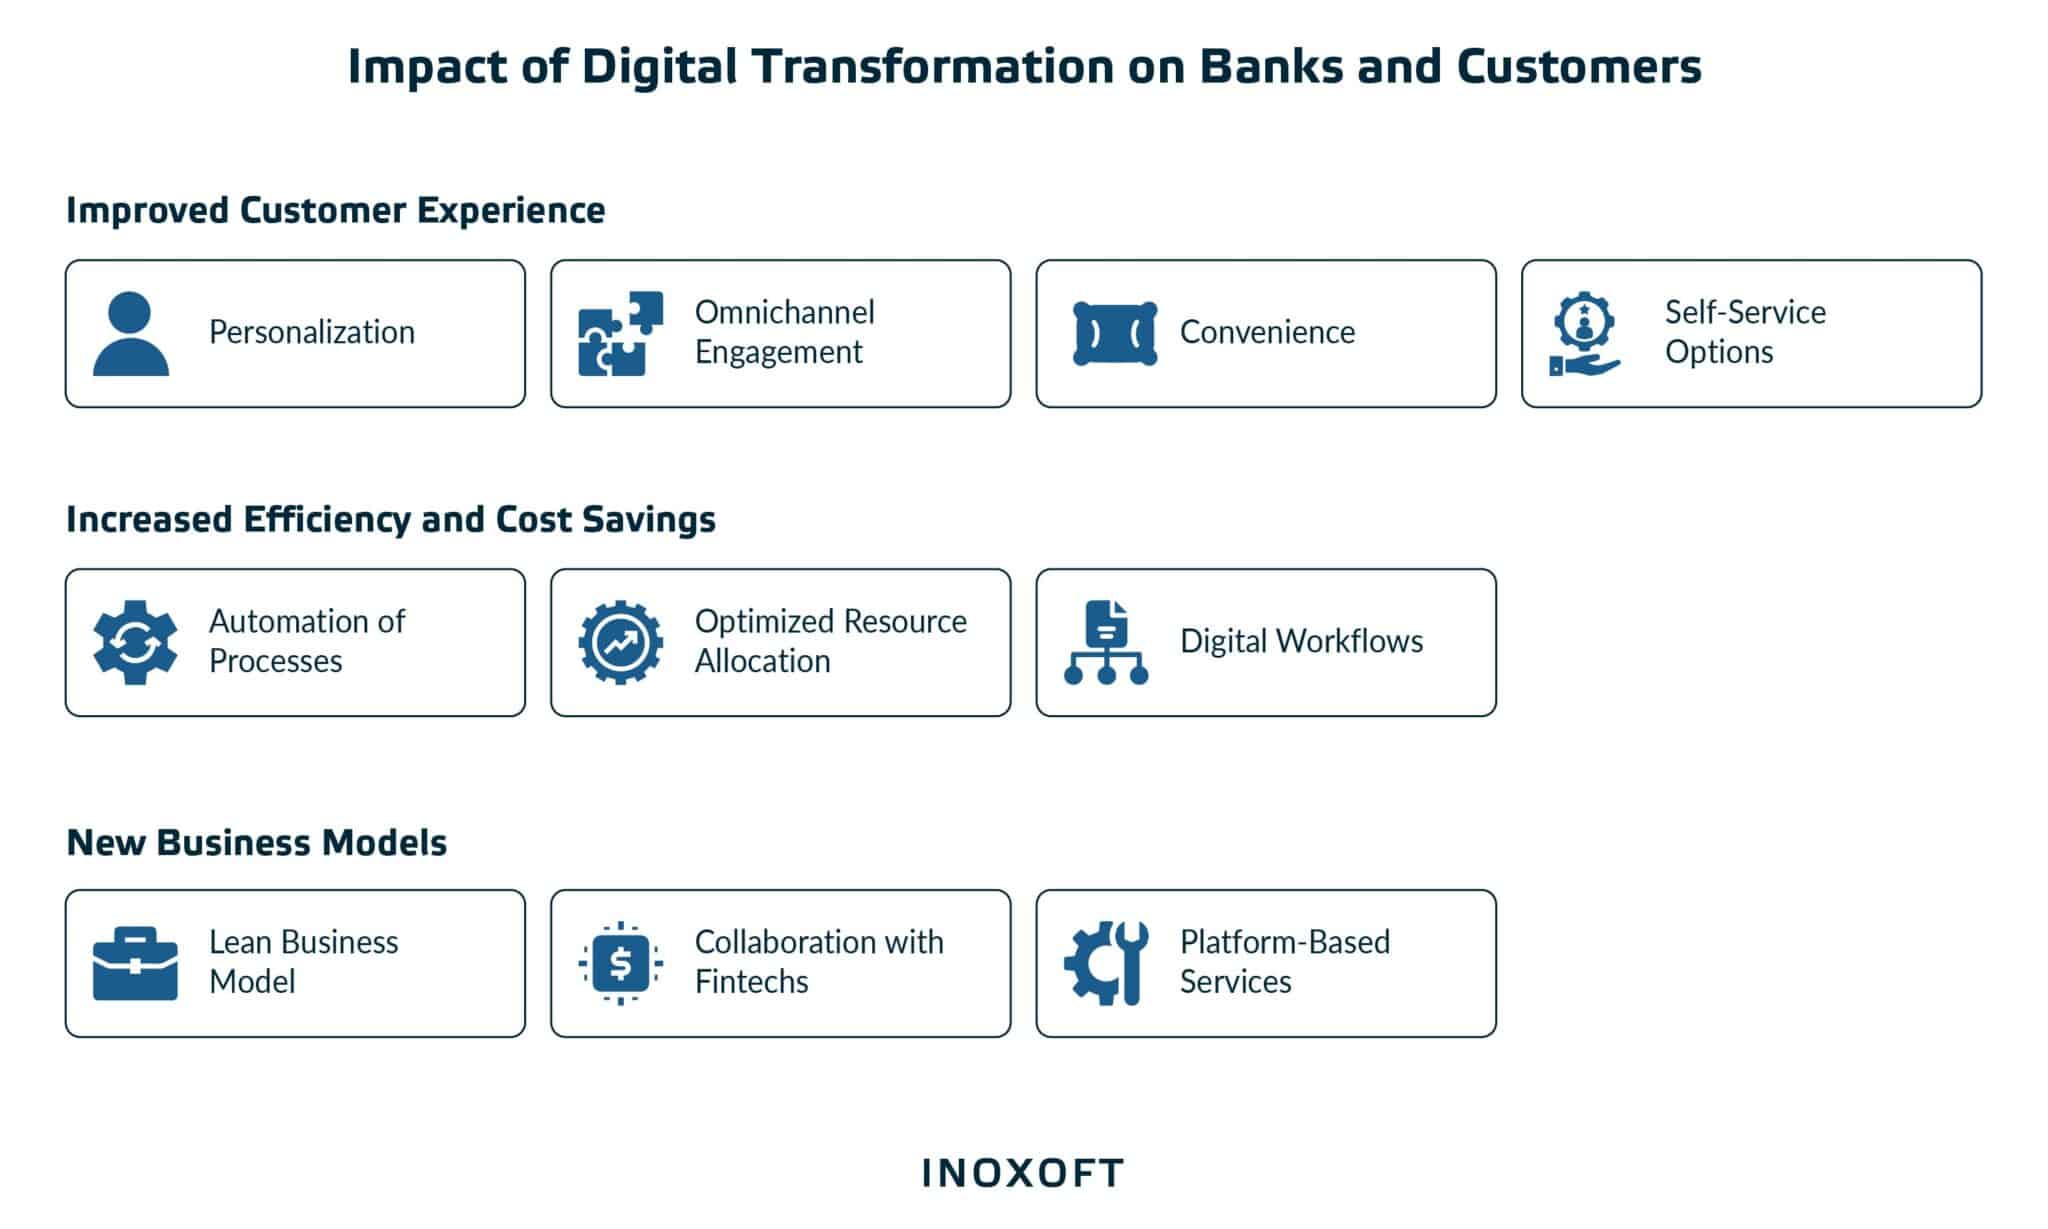 Impact of Digital Transformation on Banks and Customers